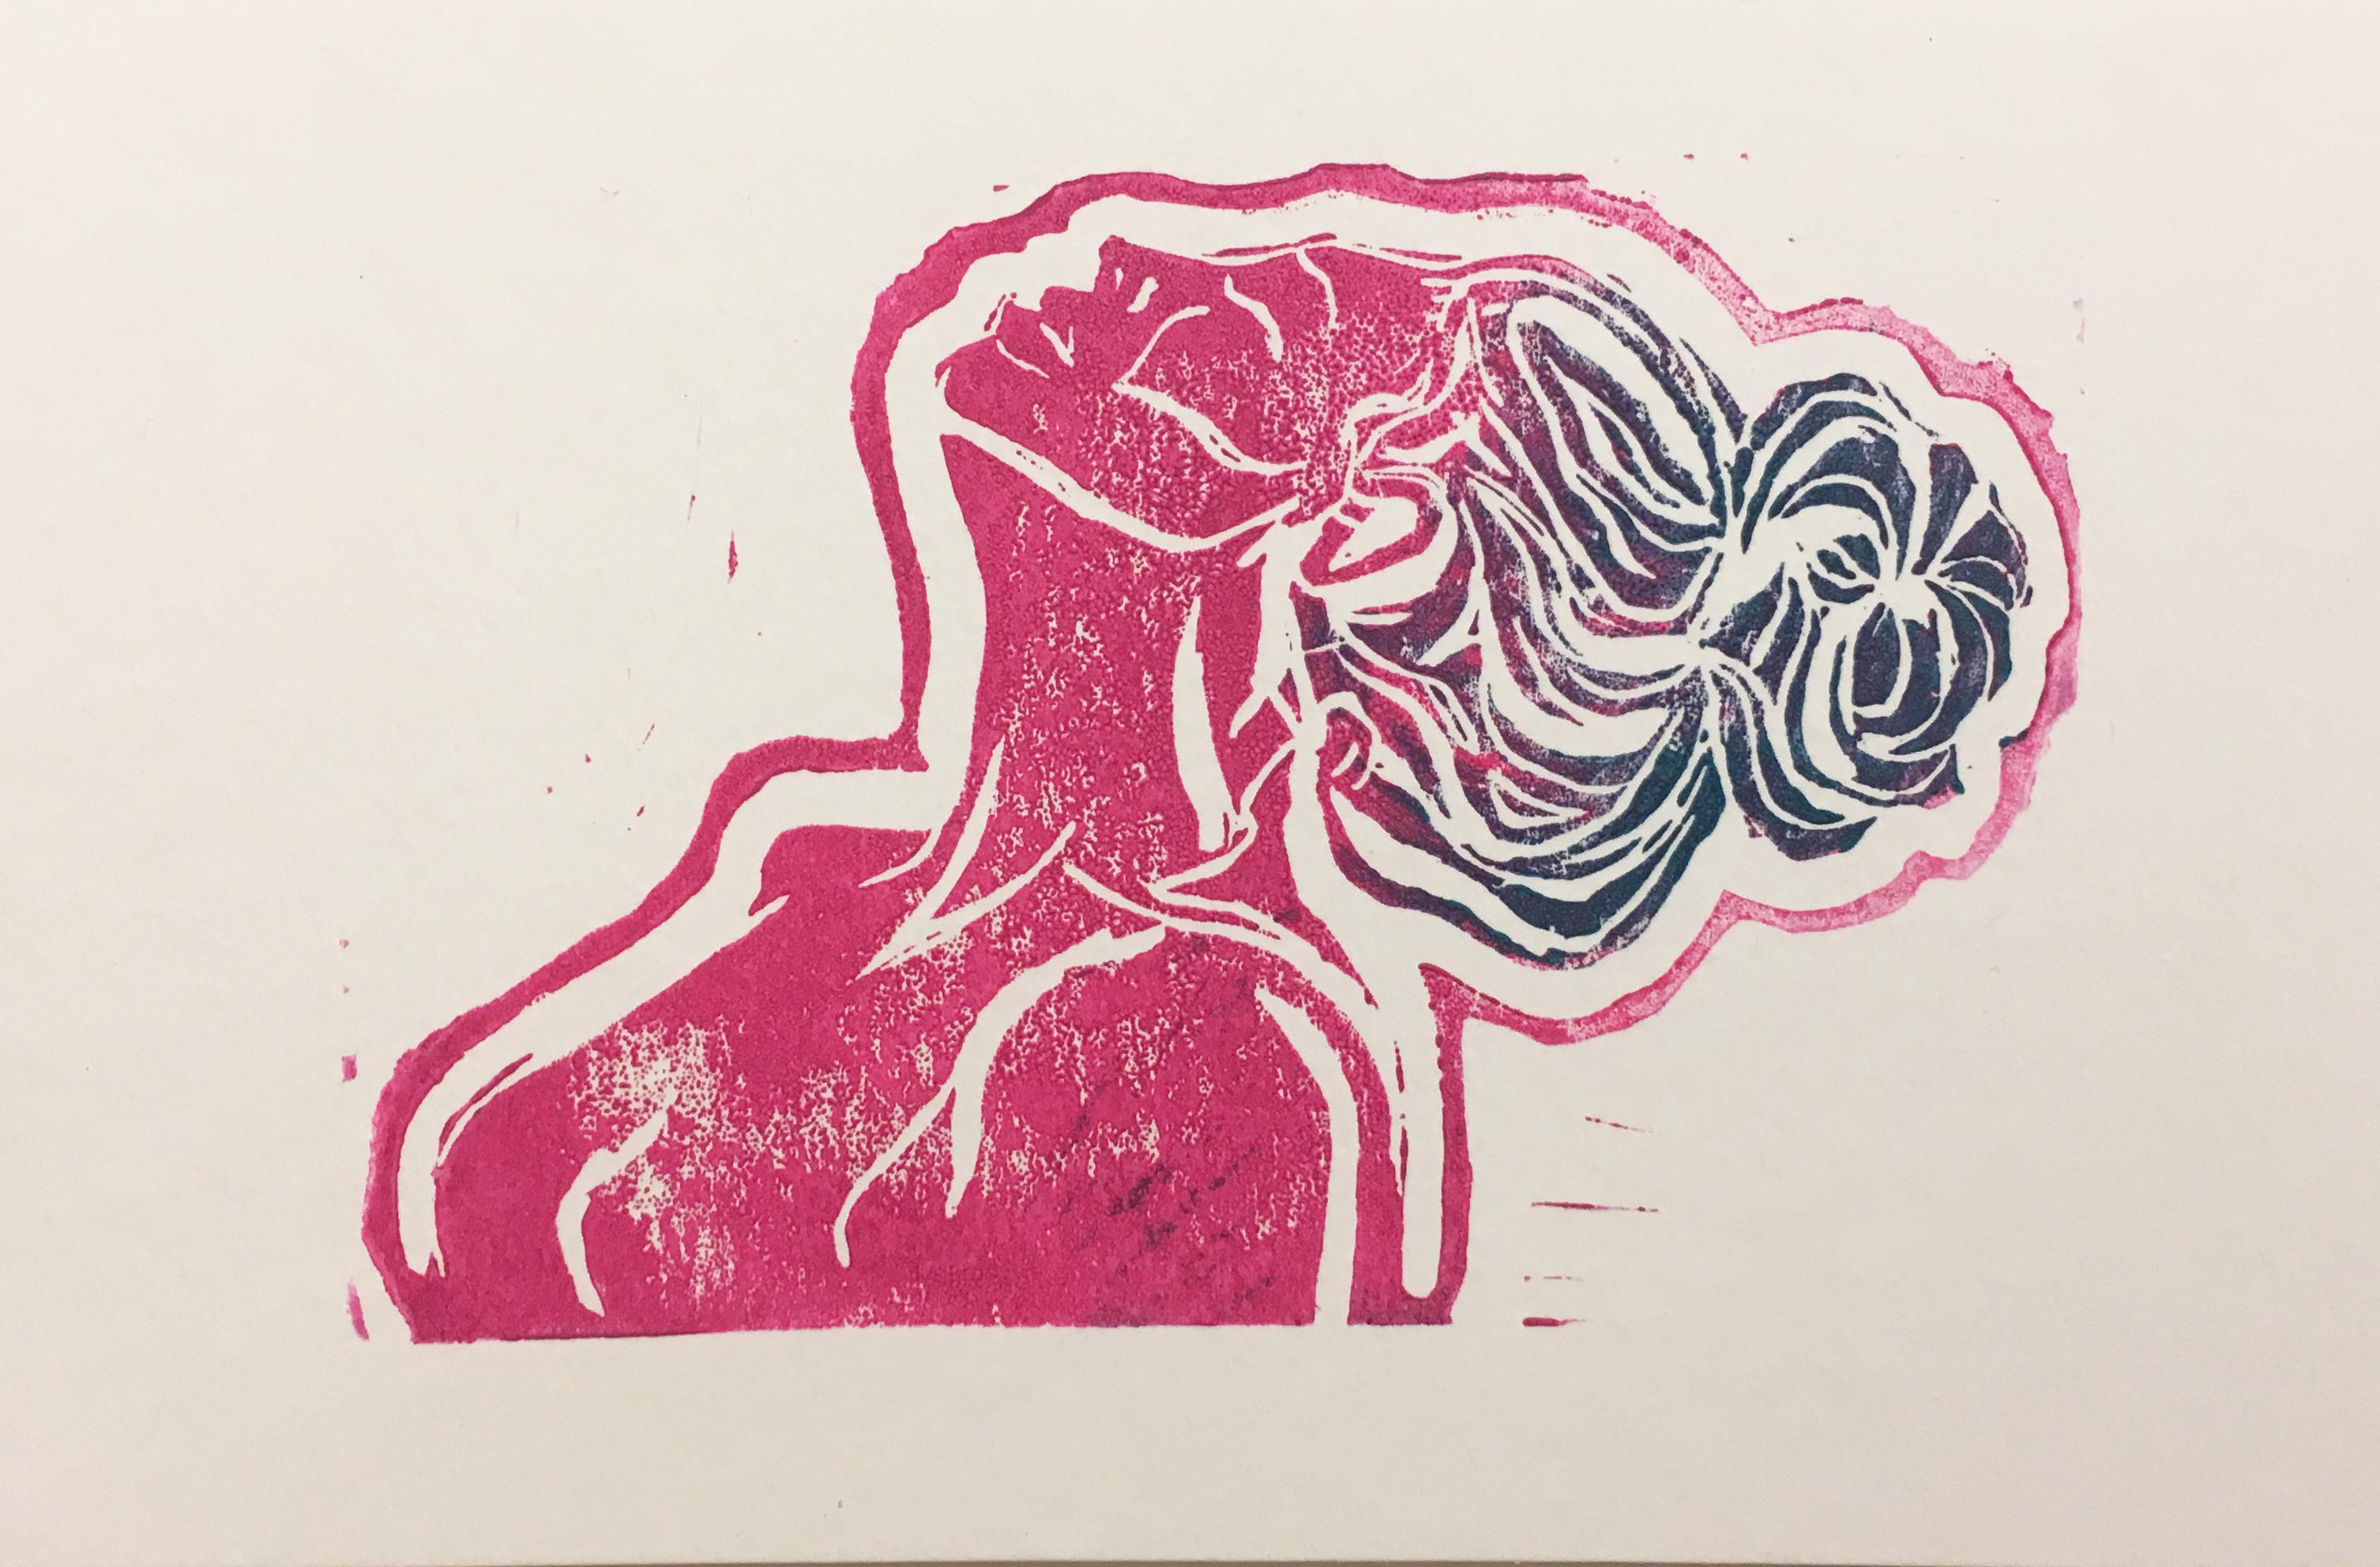 SarahGrace Nude Print - Pink Lady IV, Block Print on Paper, Woman Portrait with Hair in Bun, Nude Figure